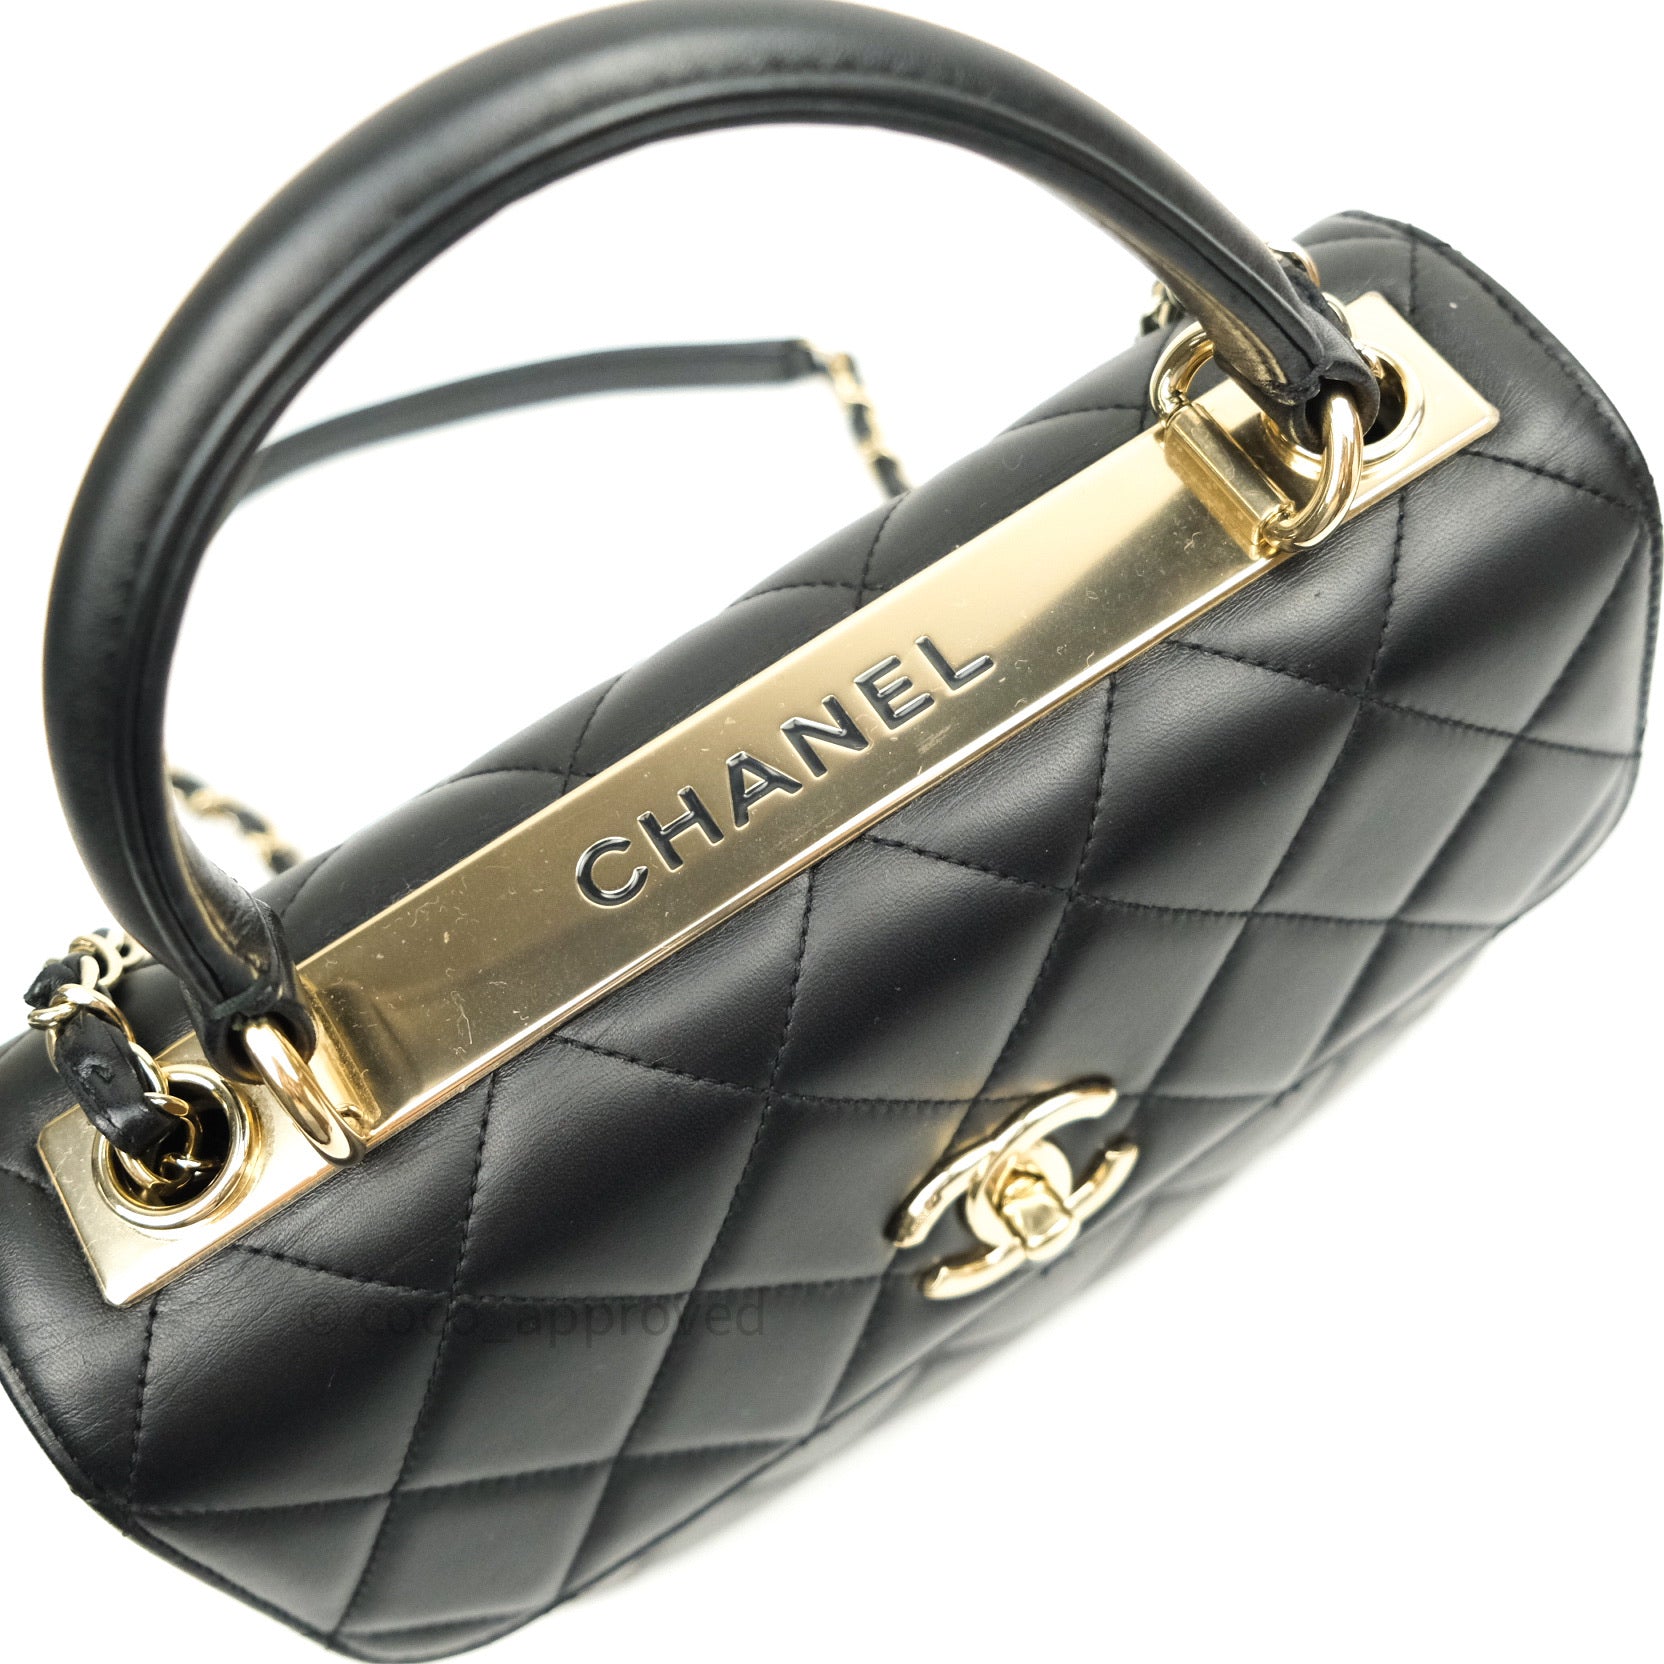 Chanel Small Quilted Trendy CC Clutch With Chain Black Lambskin Gold H – Coco  Approved Studio